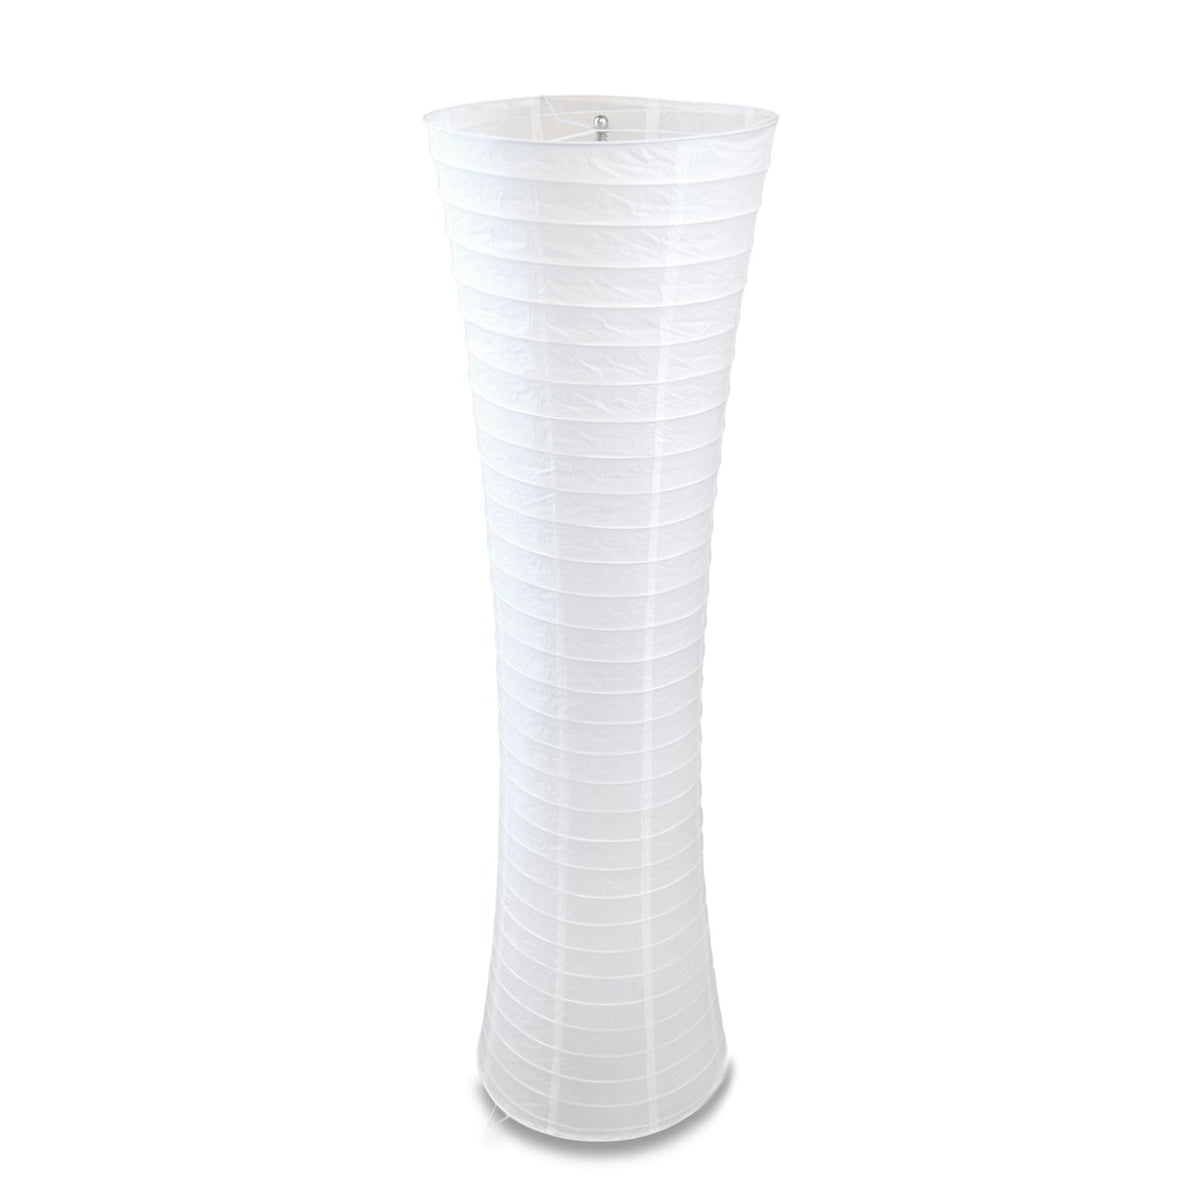 4-FT Cylinder Paper Lantern Floor Lamp Shade - 14-inch x 48-inch (SHADE + FRAME ONLY)